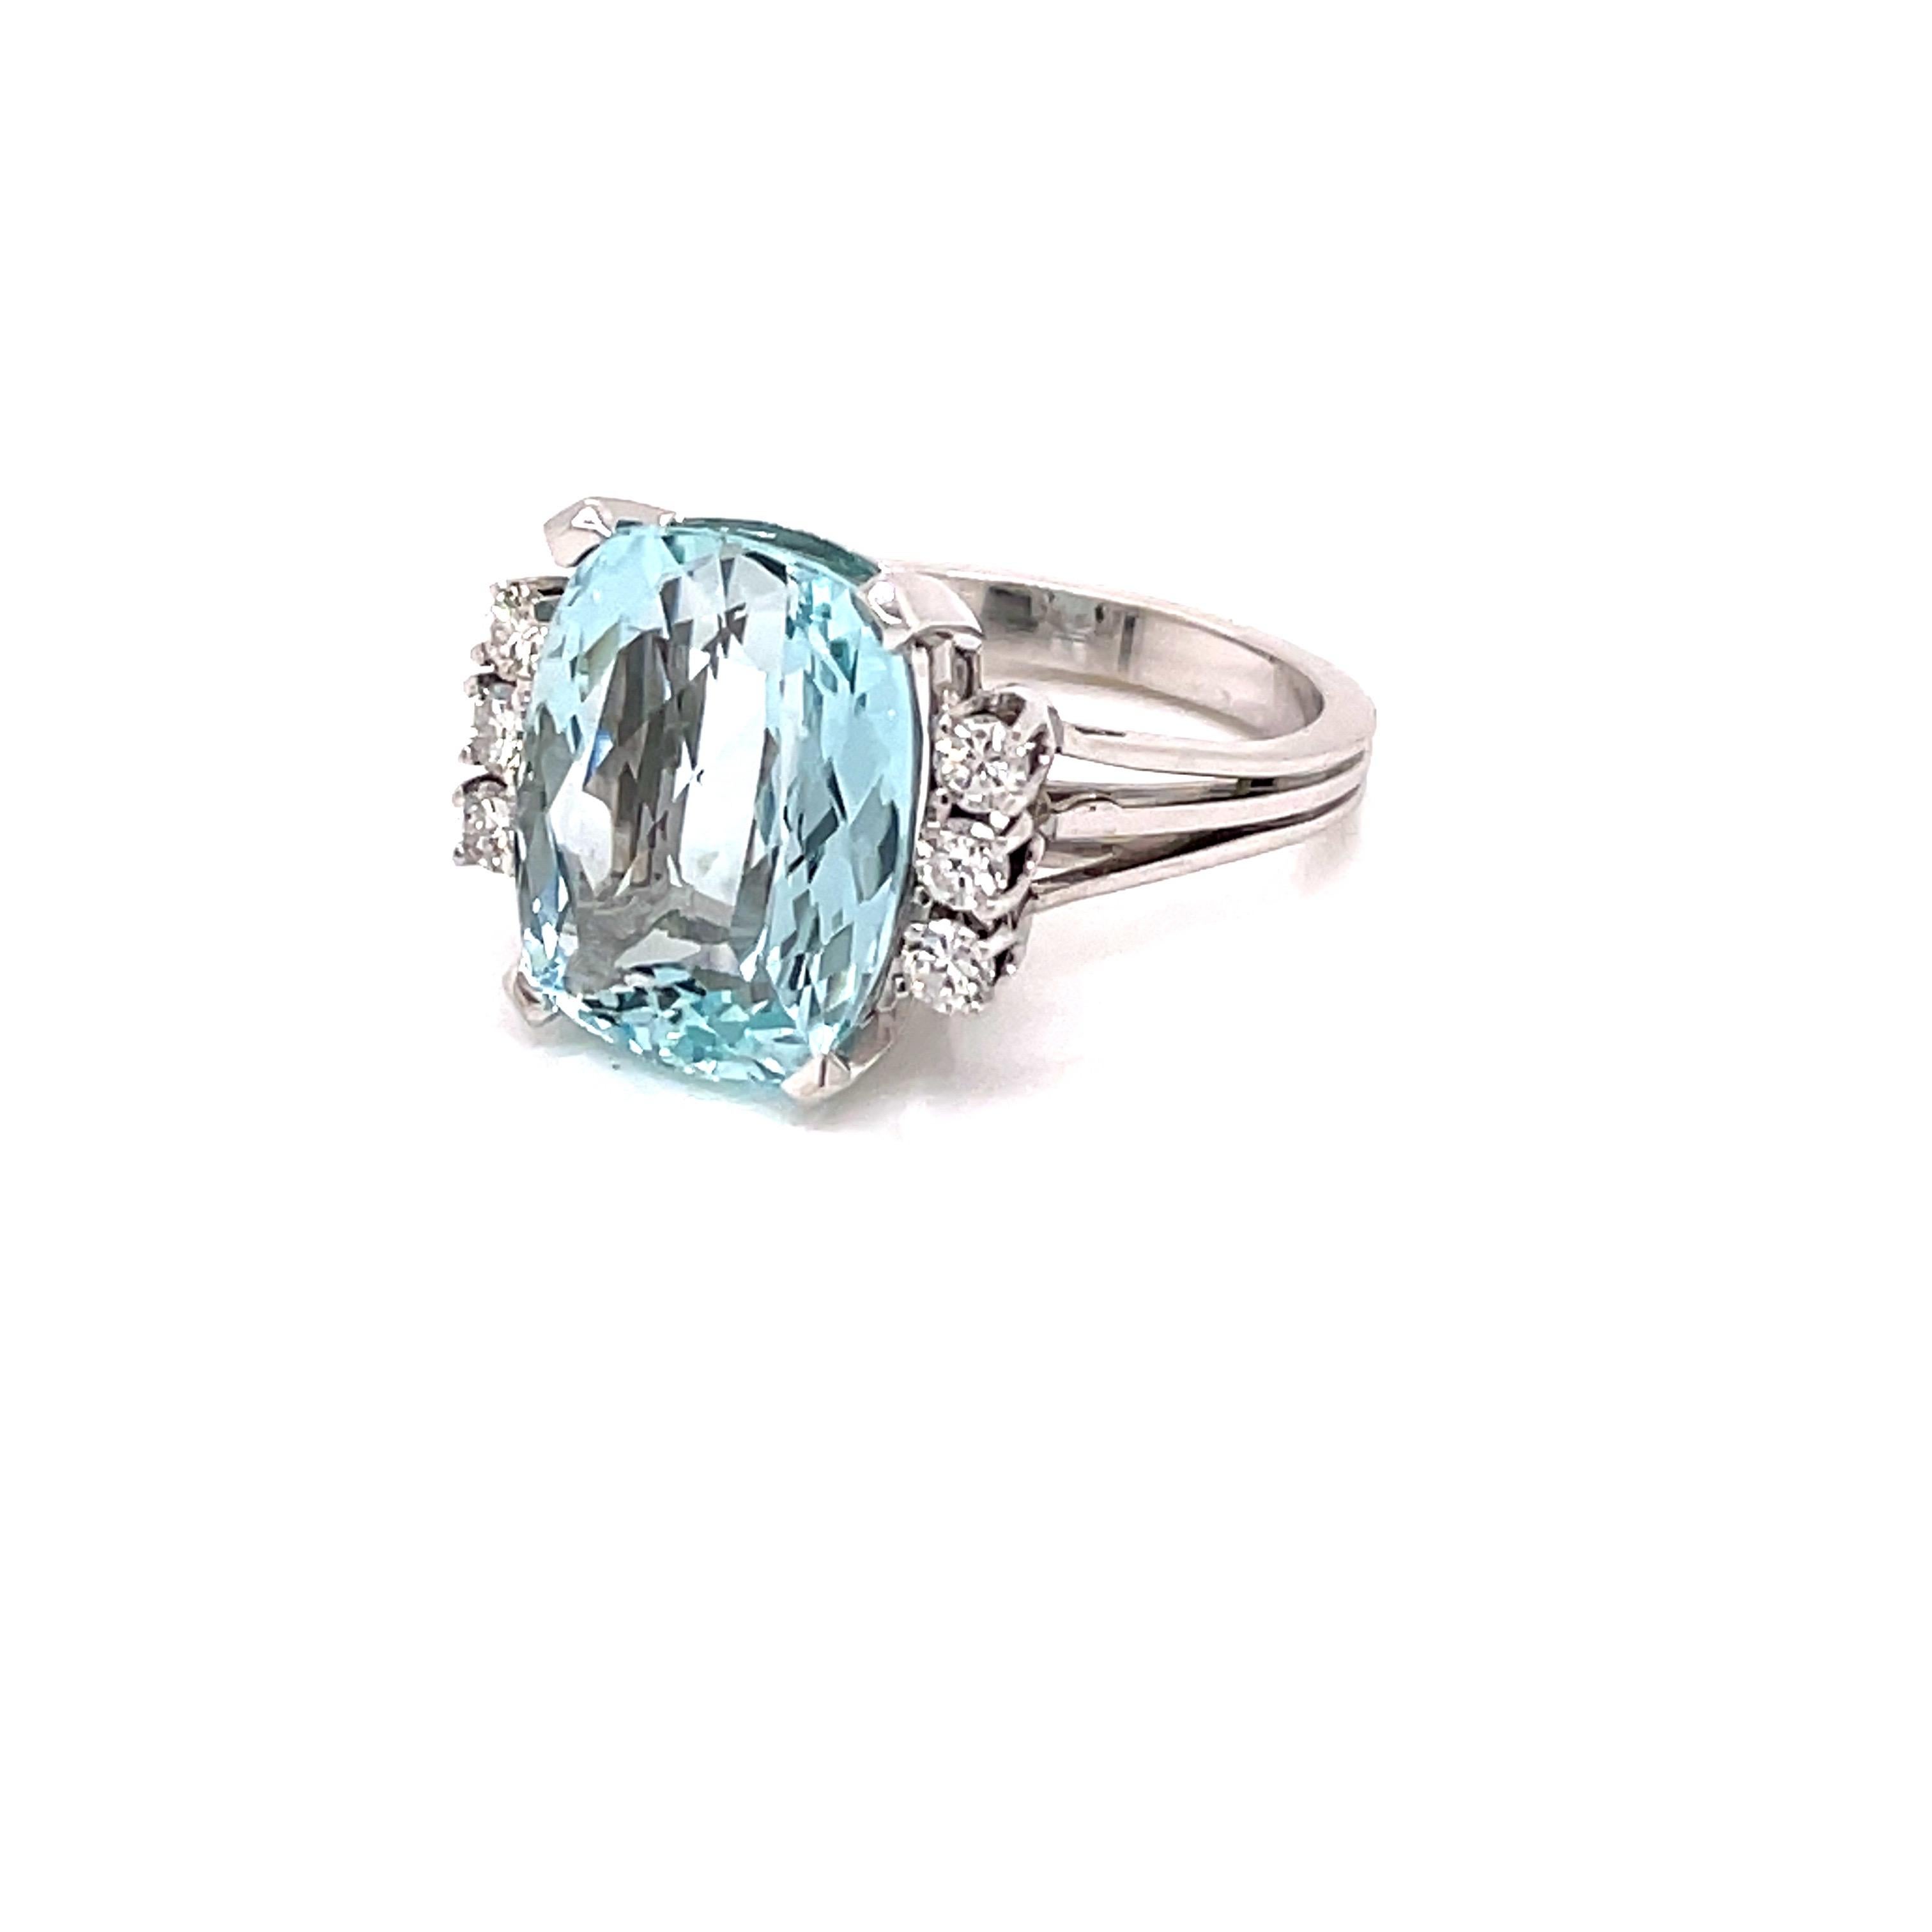 Vintage 1960's 7.35ct Cushion Cut Aquamarine Ring with Diamonds In Good Condition For Sale In Boston, MA